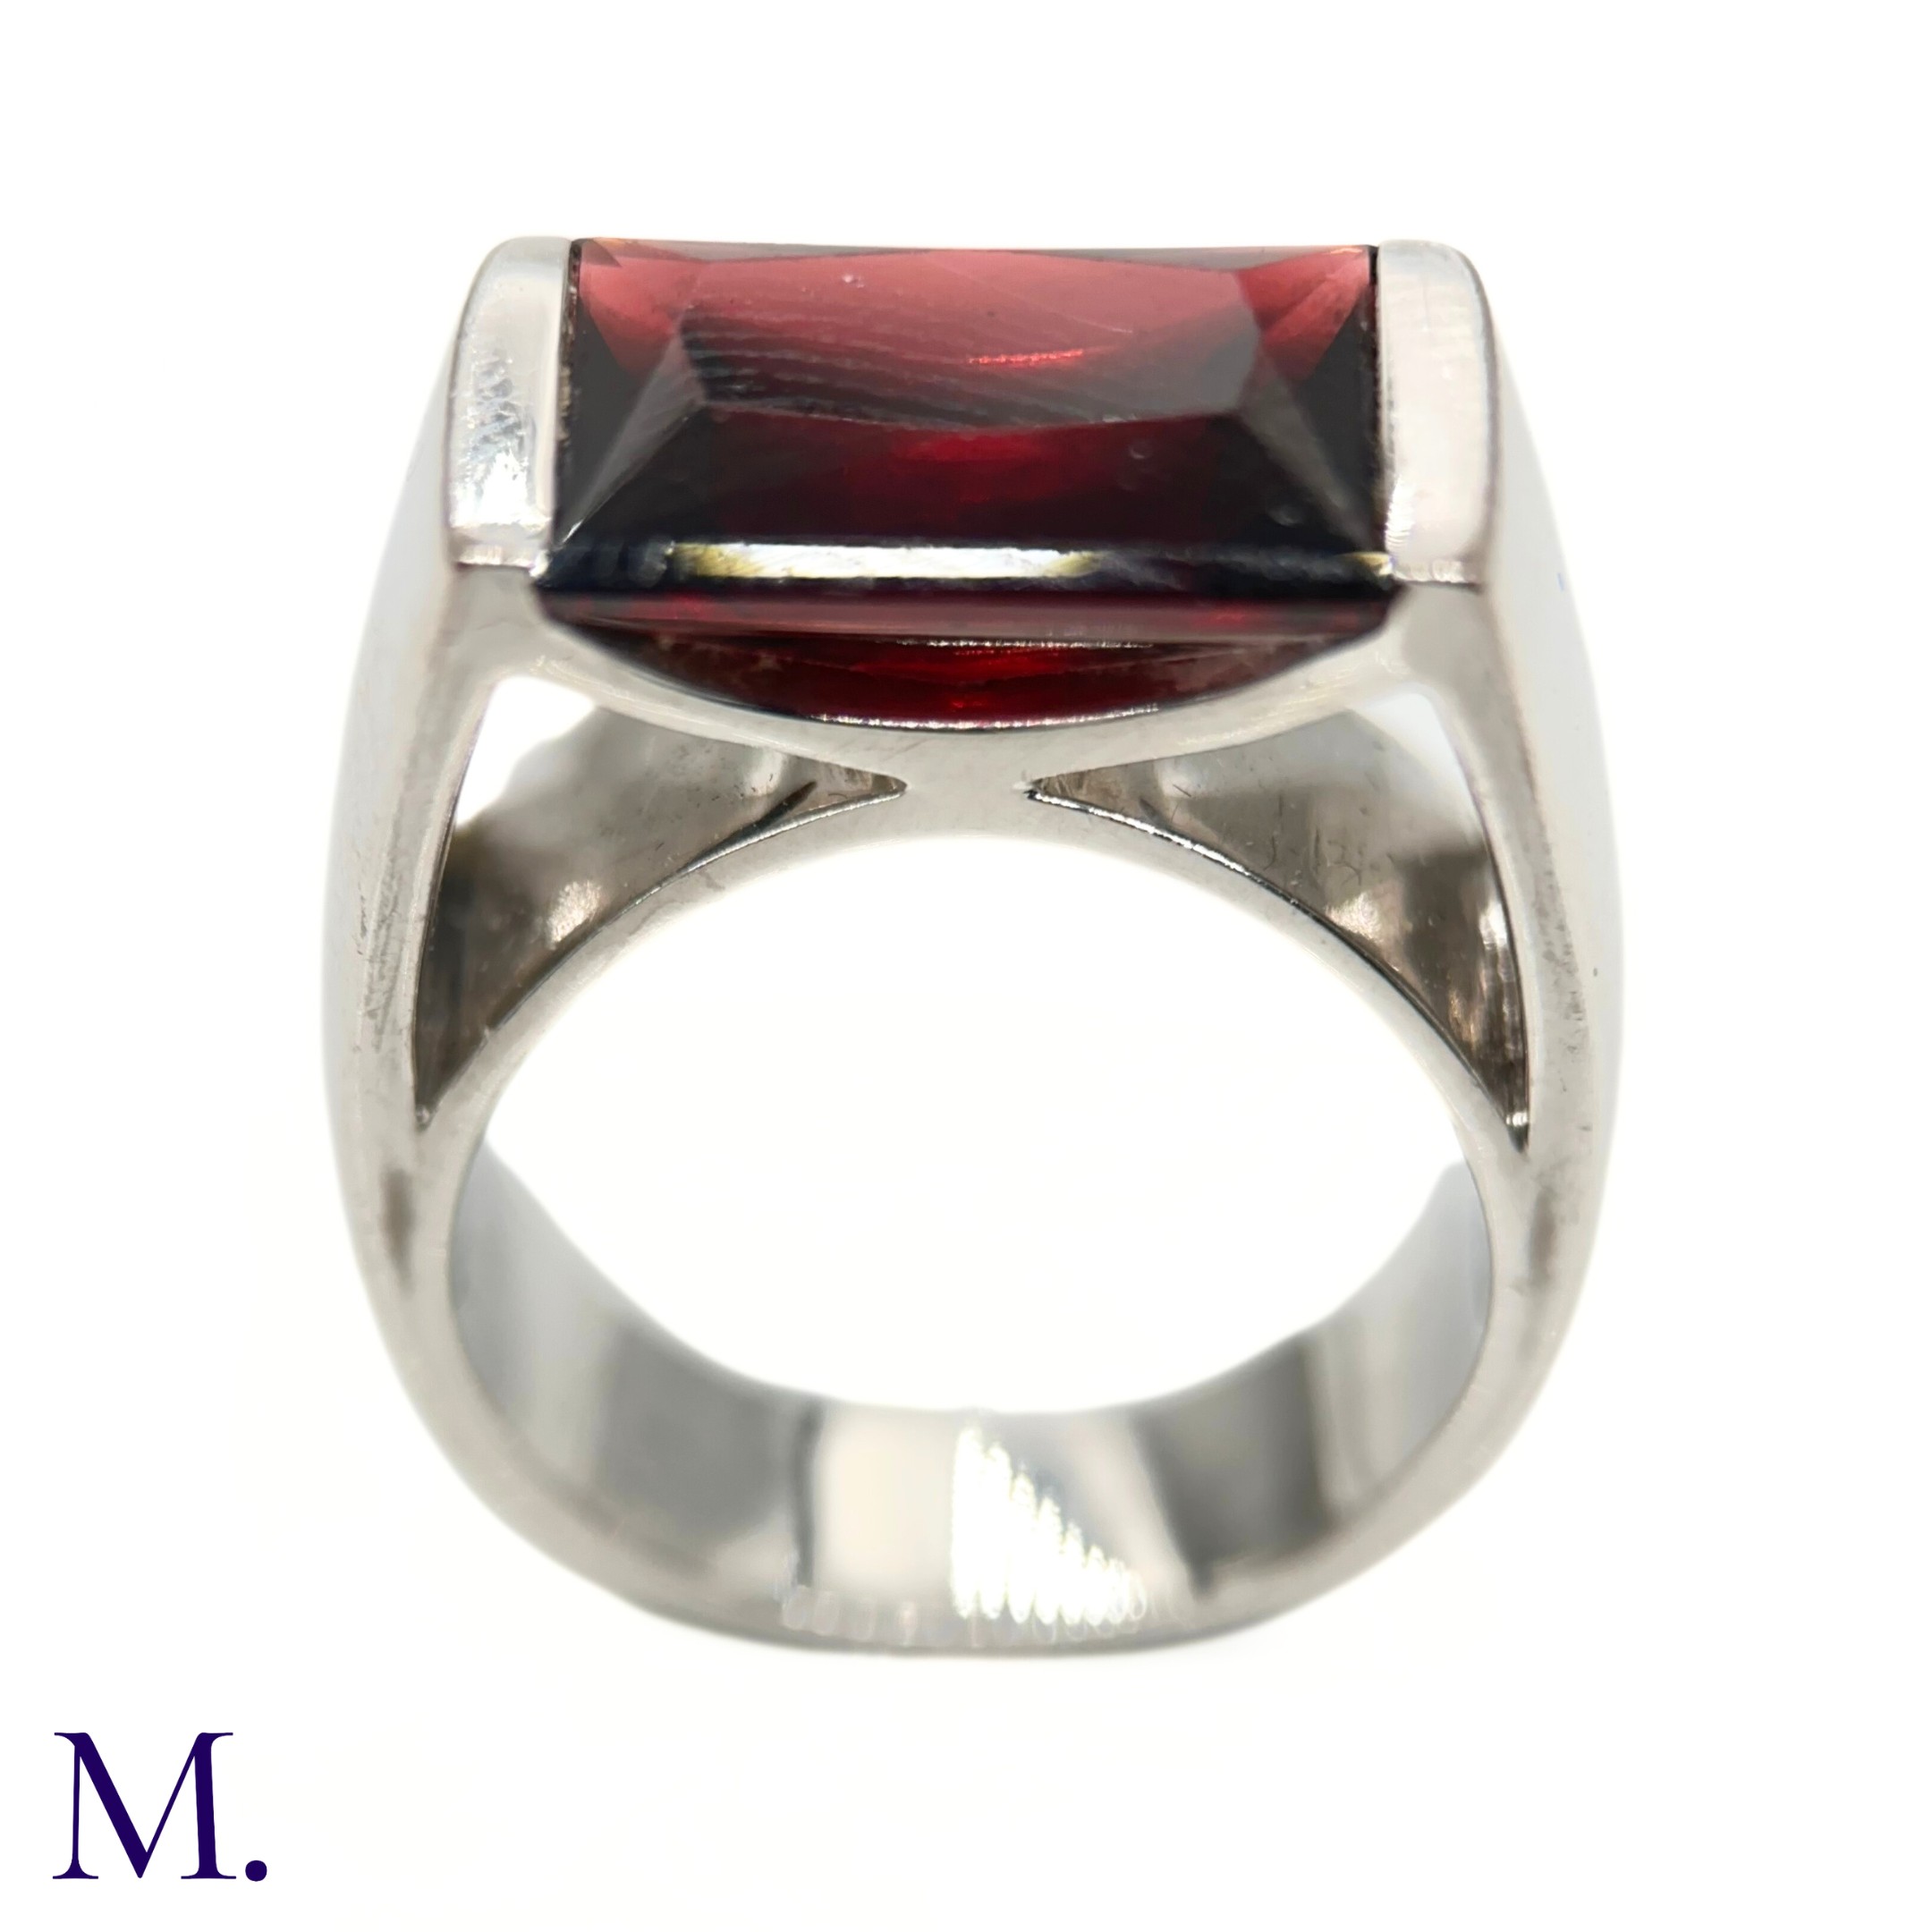 A Garnet Ring by Poiray - Image 4 of 4